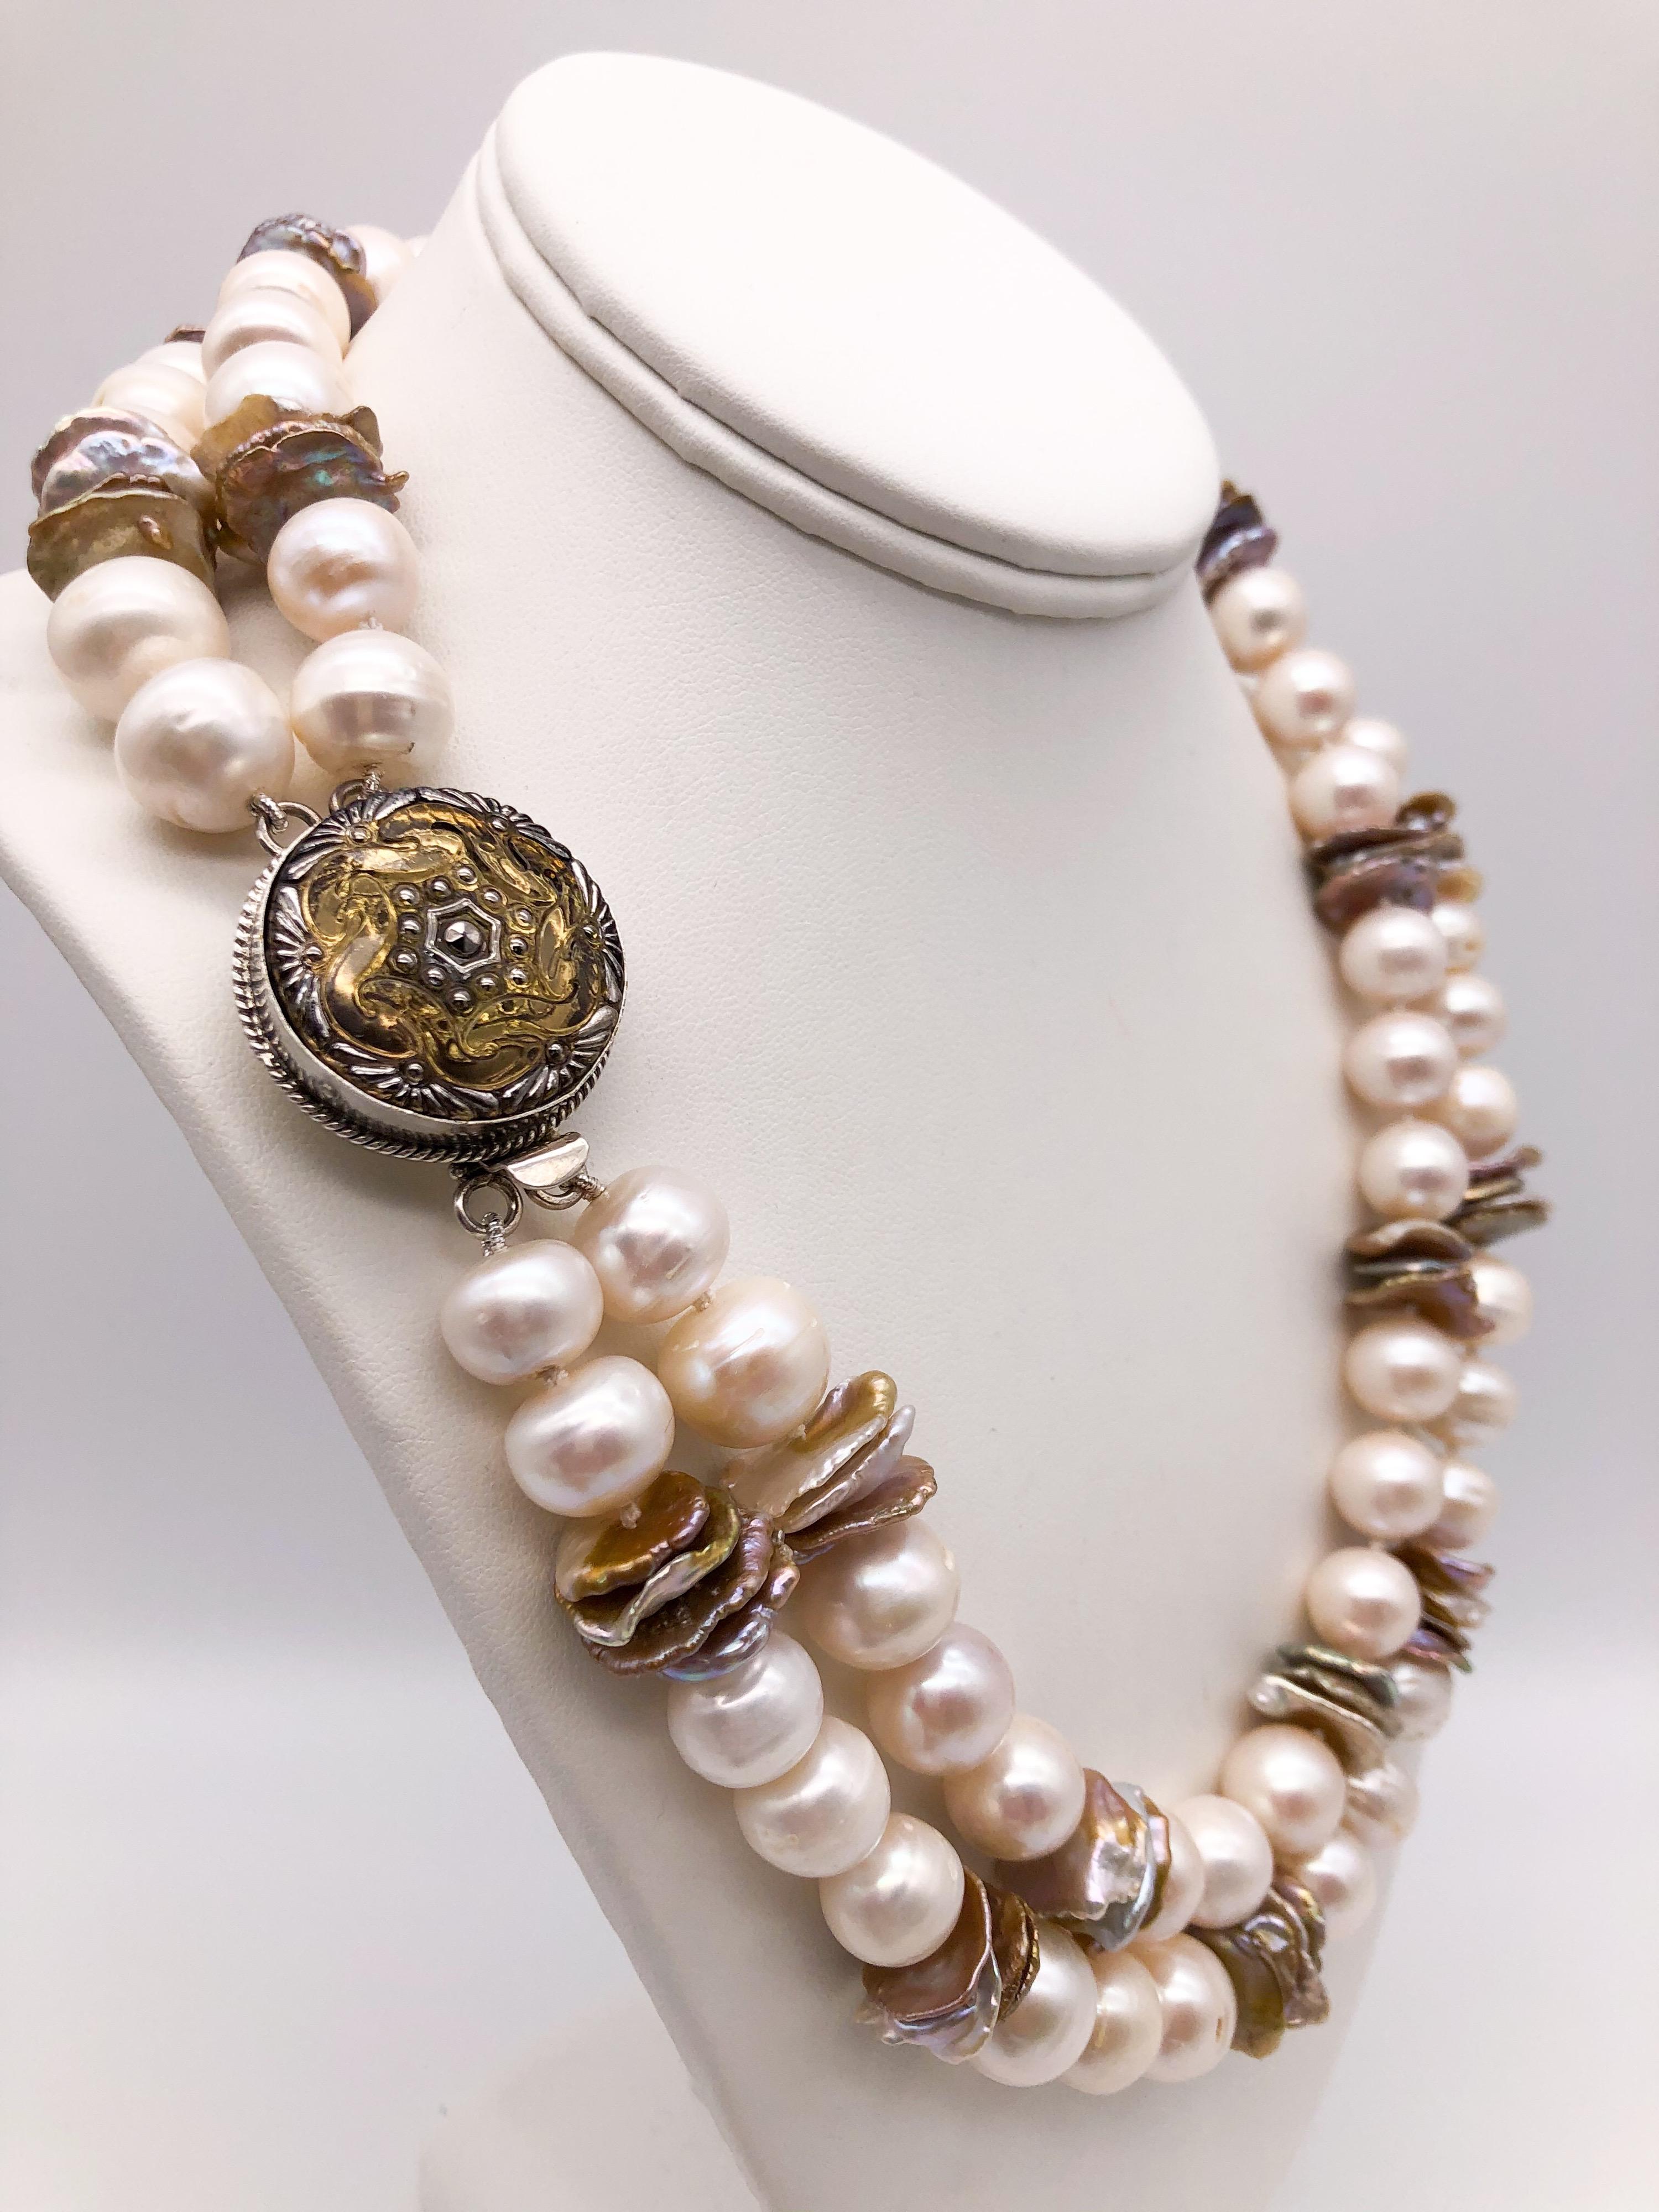 One-of-a-Kind
The lustrous white pears are separated by a series of 3 and 4 bead stacks of center drilled bronze Keshi pearls acting as spacers. The addition of the Keshi spacers adds a 
lovely textural quality to this opera-length necklace. Setting